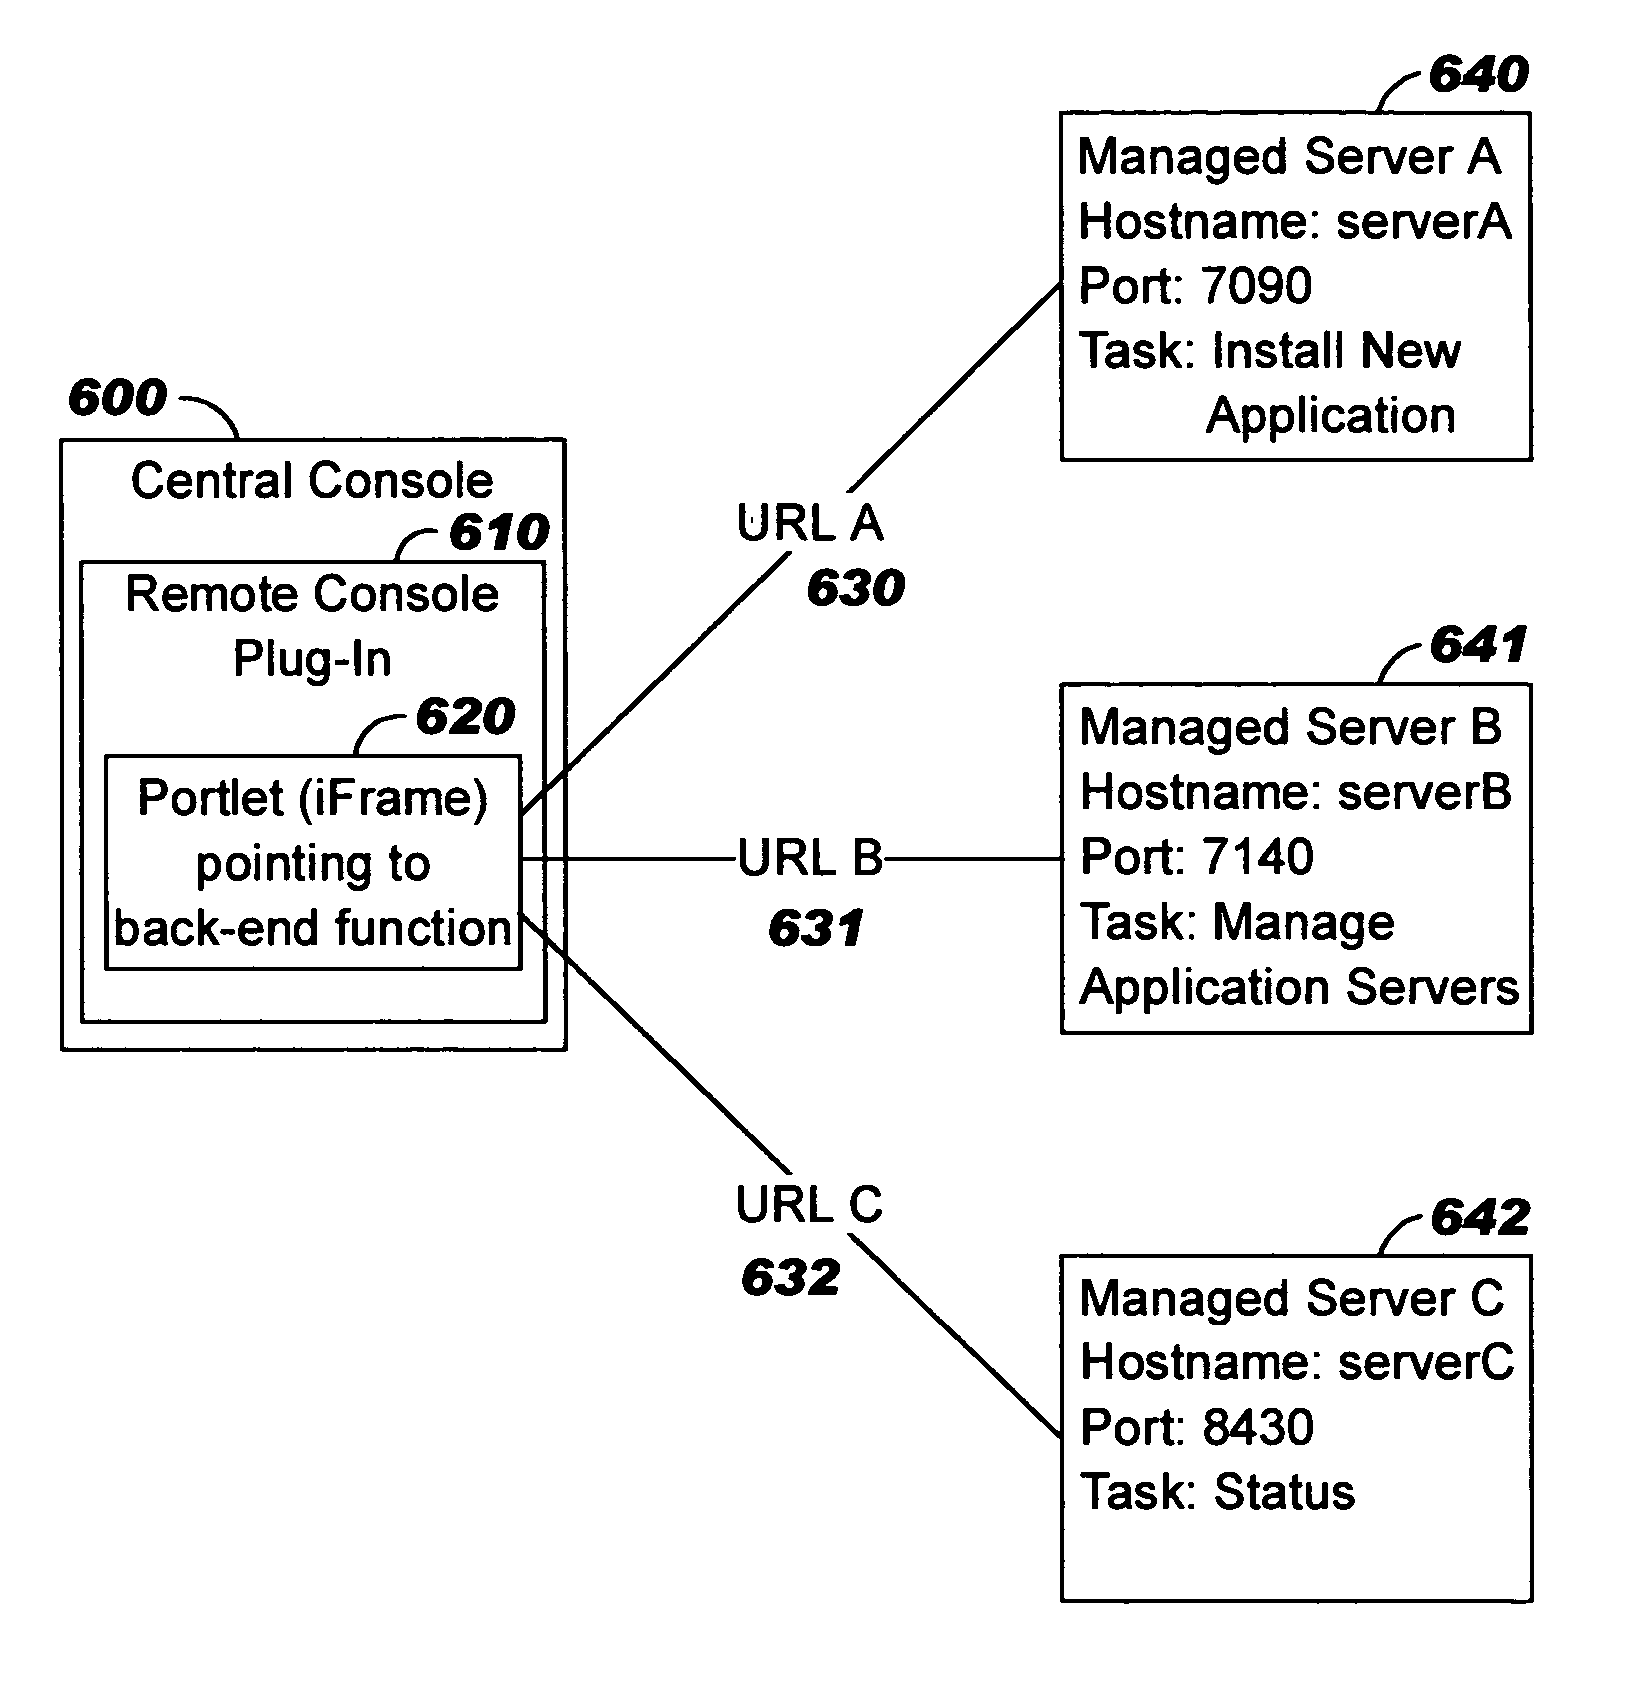 Federating legacy/remote content into a central network console